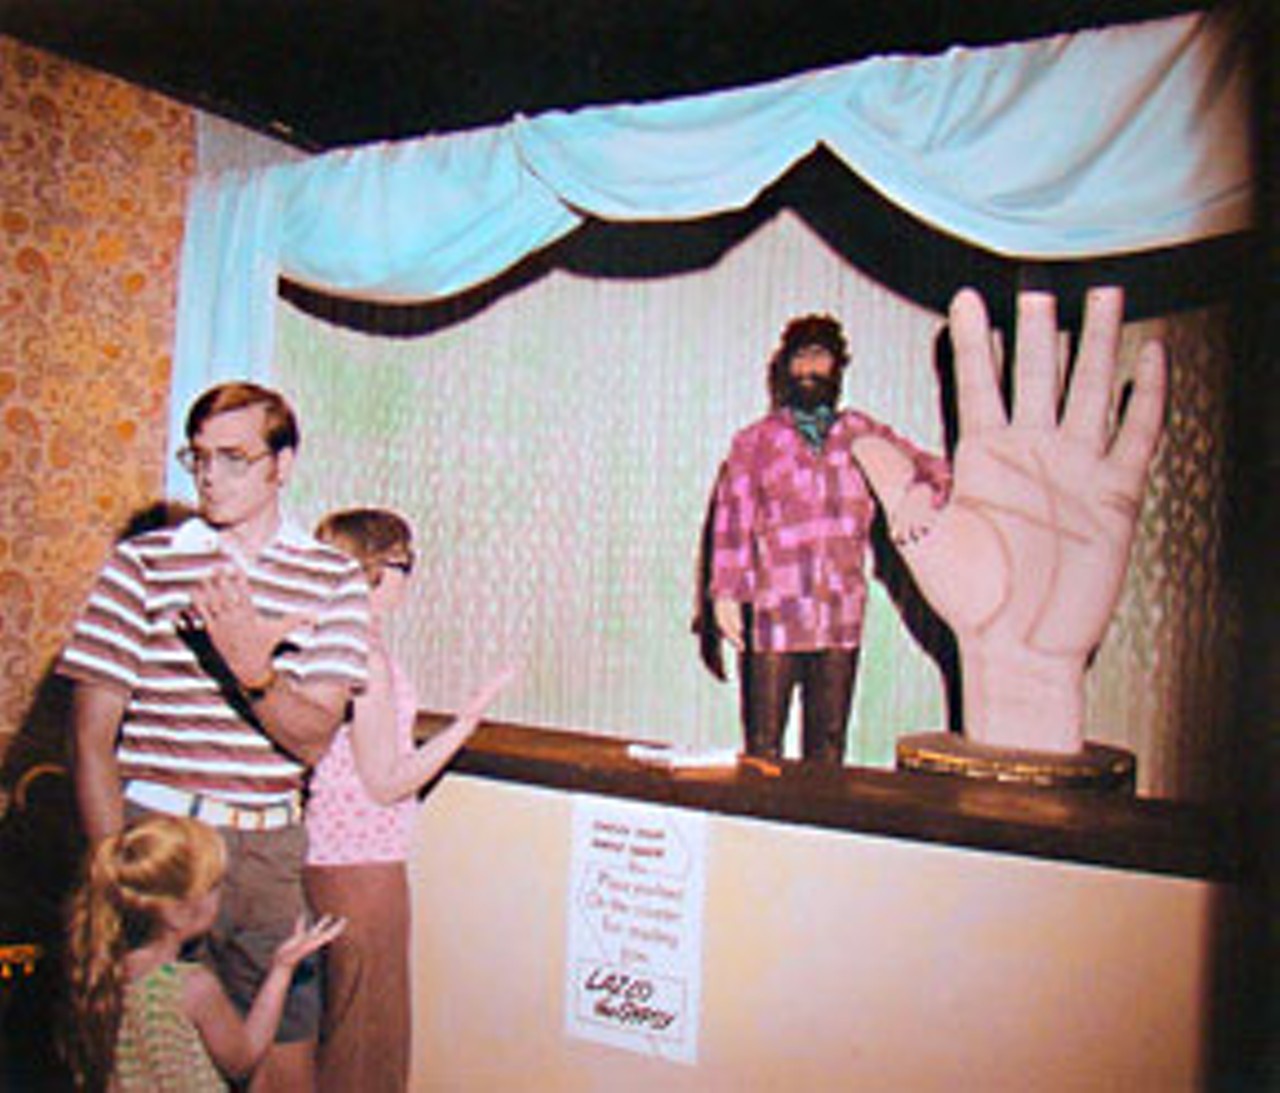 Mystery Fun House
From 1976 until 2001, Mystery Fun House was a second-tier tourist attraction that operated in the I-Drive corridor in Orlando. It was an old-school fun house, with mirror mazes and creepy dungeon rooms and monsters and magic shows, and it was wildly popular with families in the 1970s and '80s. Today, it's a Westgate Resorts/Florida Visitors Welcome Center owned by Central Florida Investments (which owns Westgate).